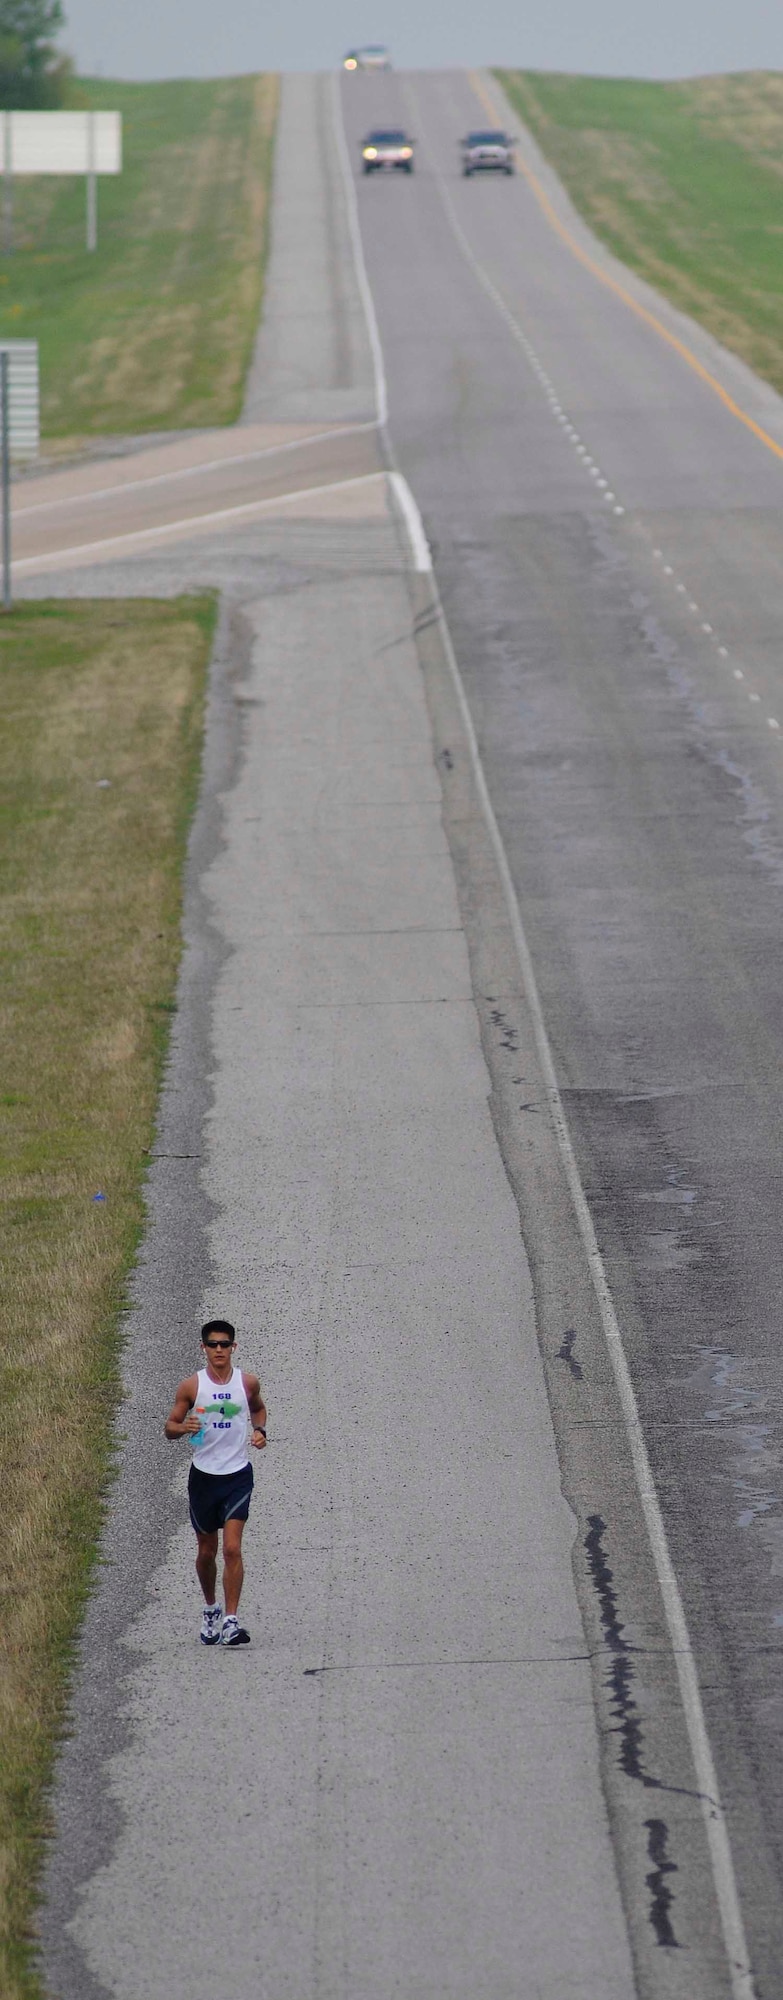 Senior Airman Brendan Brustad of Altus Air Force Base makes his way eastward on U.S. 62 on day two of his 168-mile journey in honor of the victims of the April 19, 1995, bombing of the Alfred P. Murrah Federal
Building in Oklahoma City.
